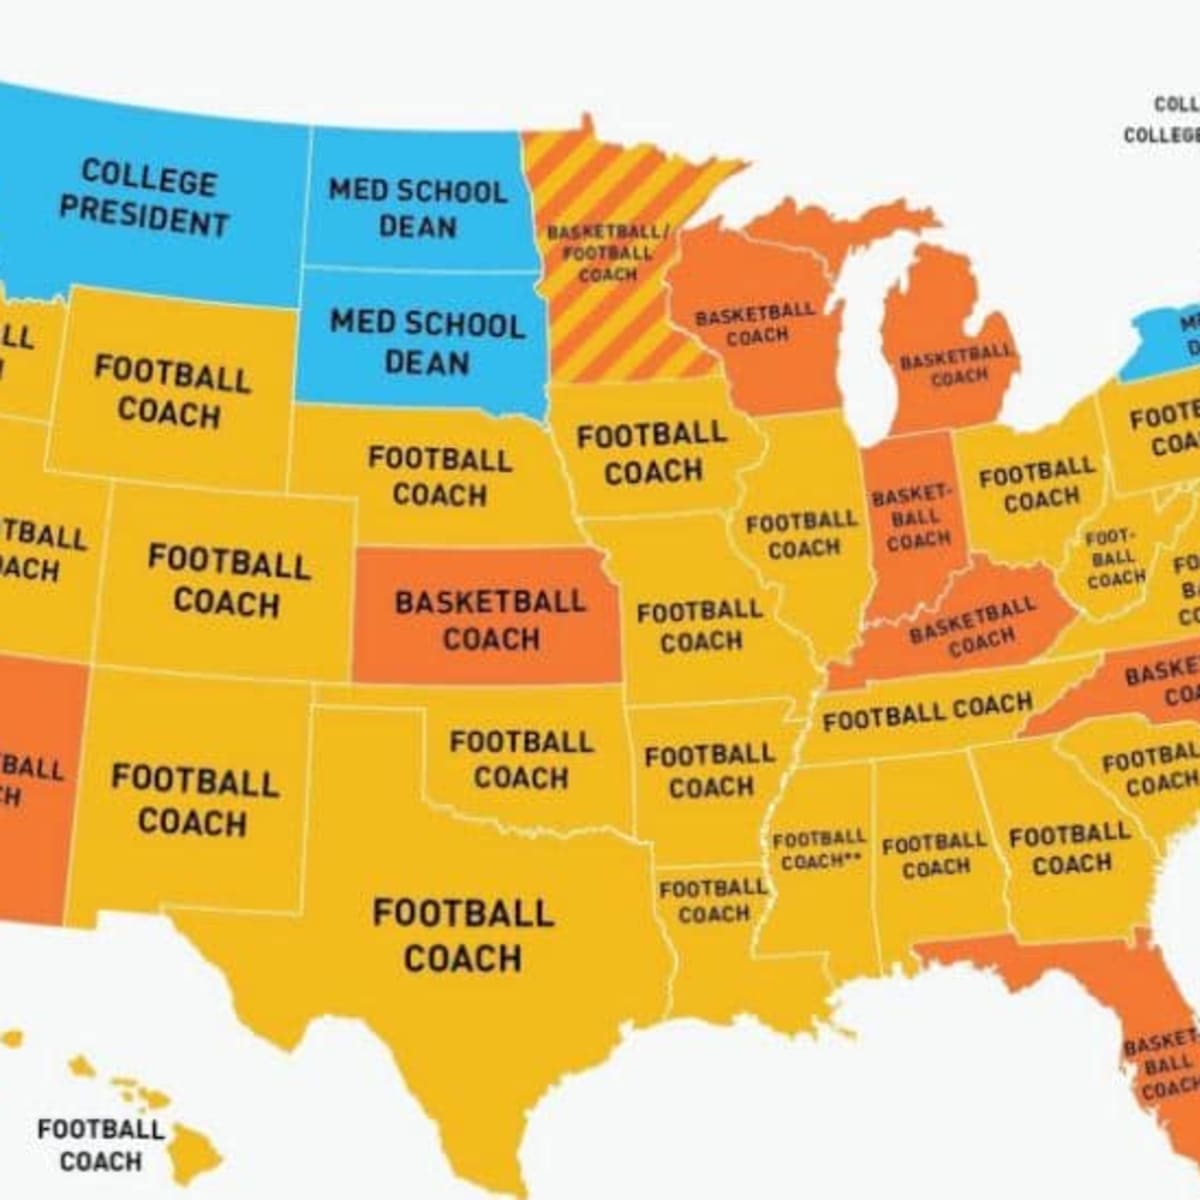 The highest paid public employee in 26 out of 50 states is a football coach  - Footballscoop